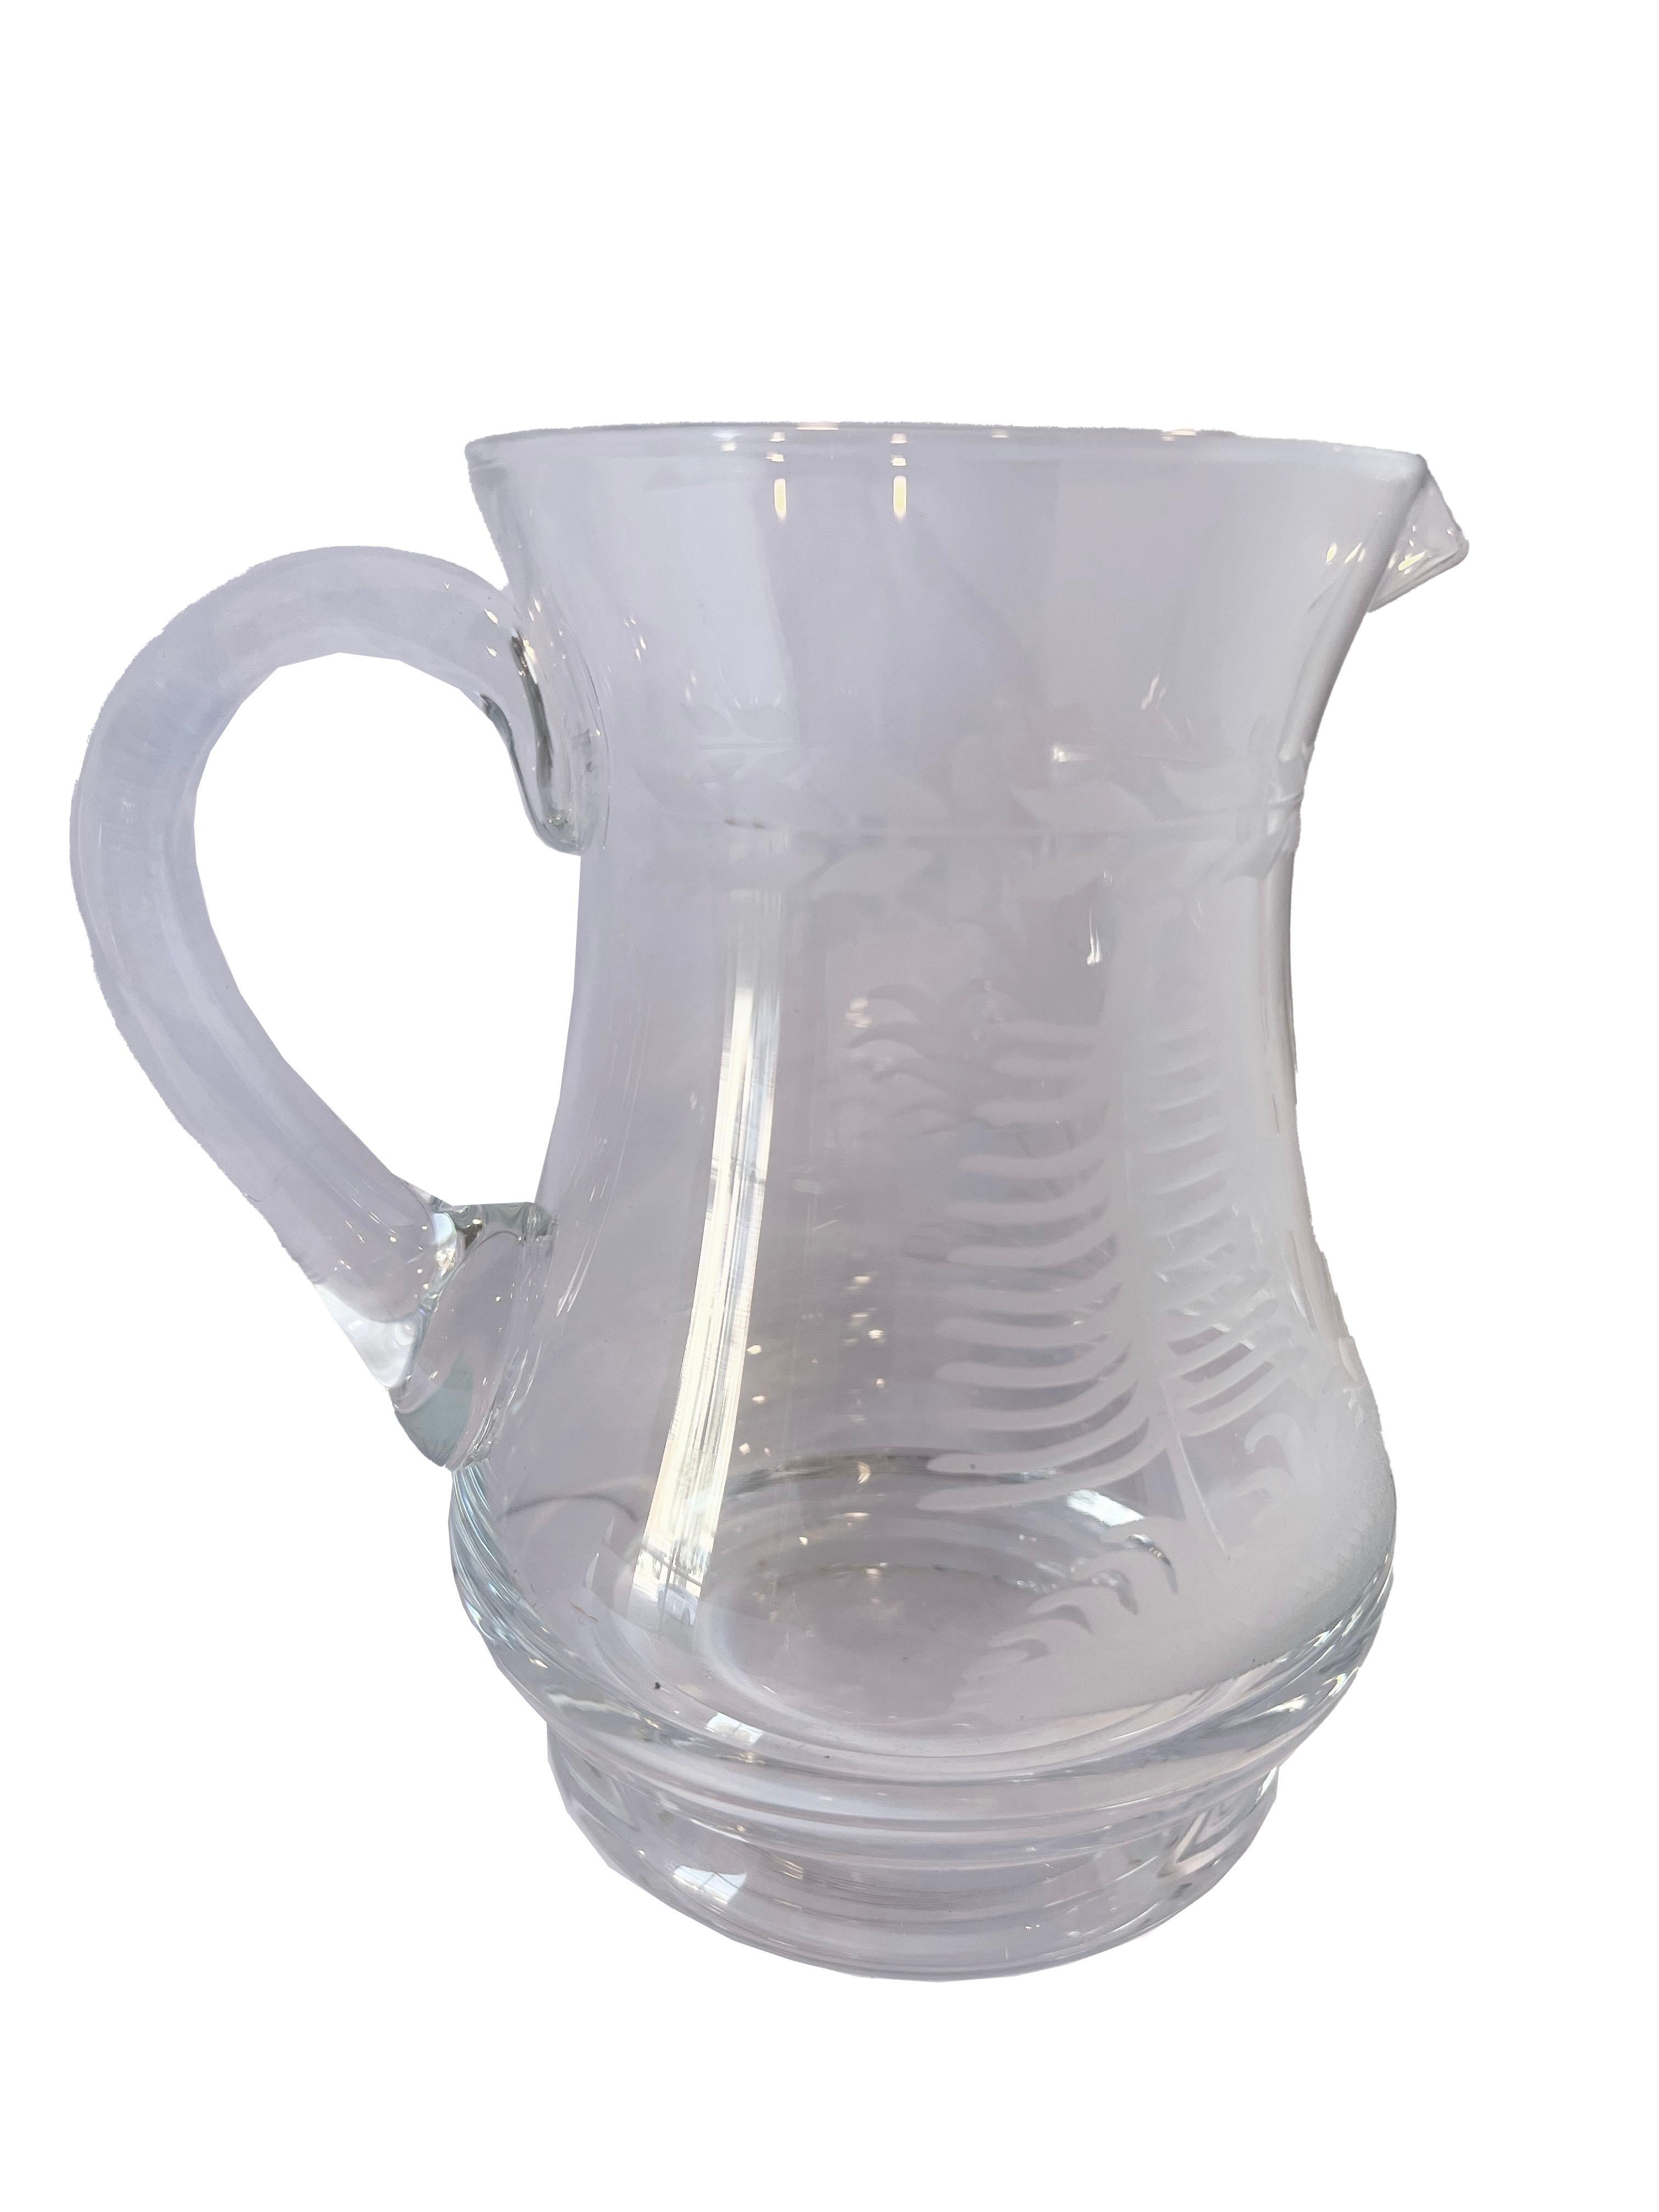 Unknown Set of 3 Glass Etched Pitchers from Andre Leon Talley's Private Collection For Sale